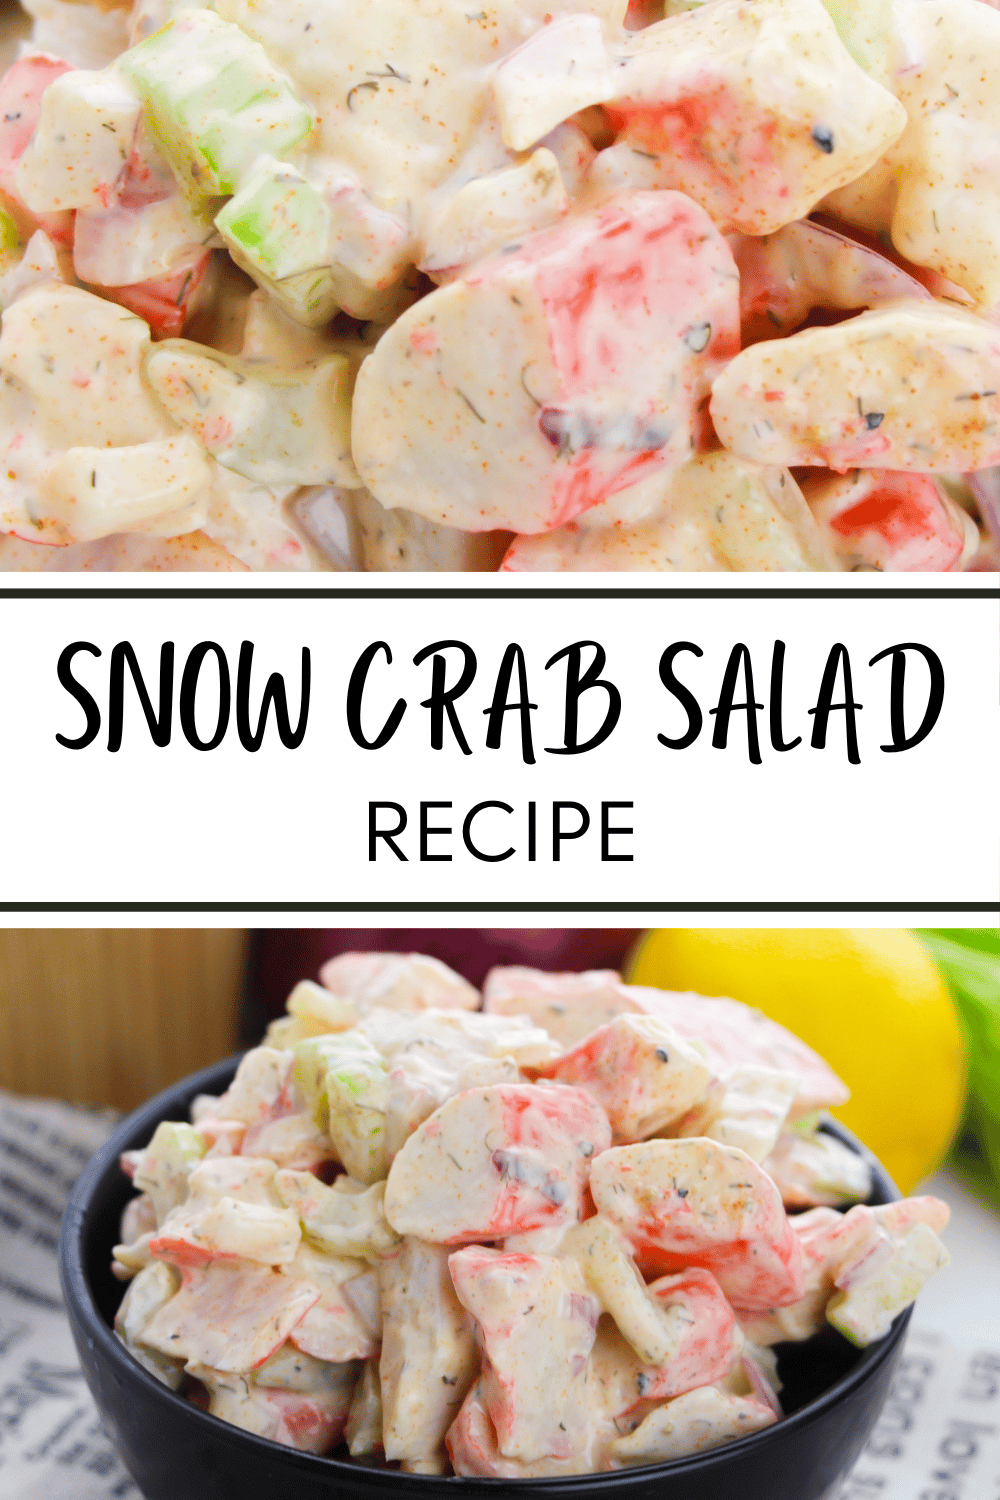 This Snow Crab Salad is a flavorful salad that features sweet snow crab meat along with a creamy dressing. It's perfect for lunch. #snowcrabsalad #crabsalad #snowcrab #salad #lunch via @wondermomwannab